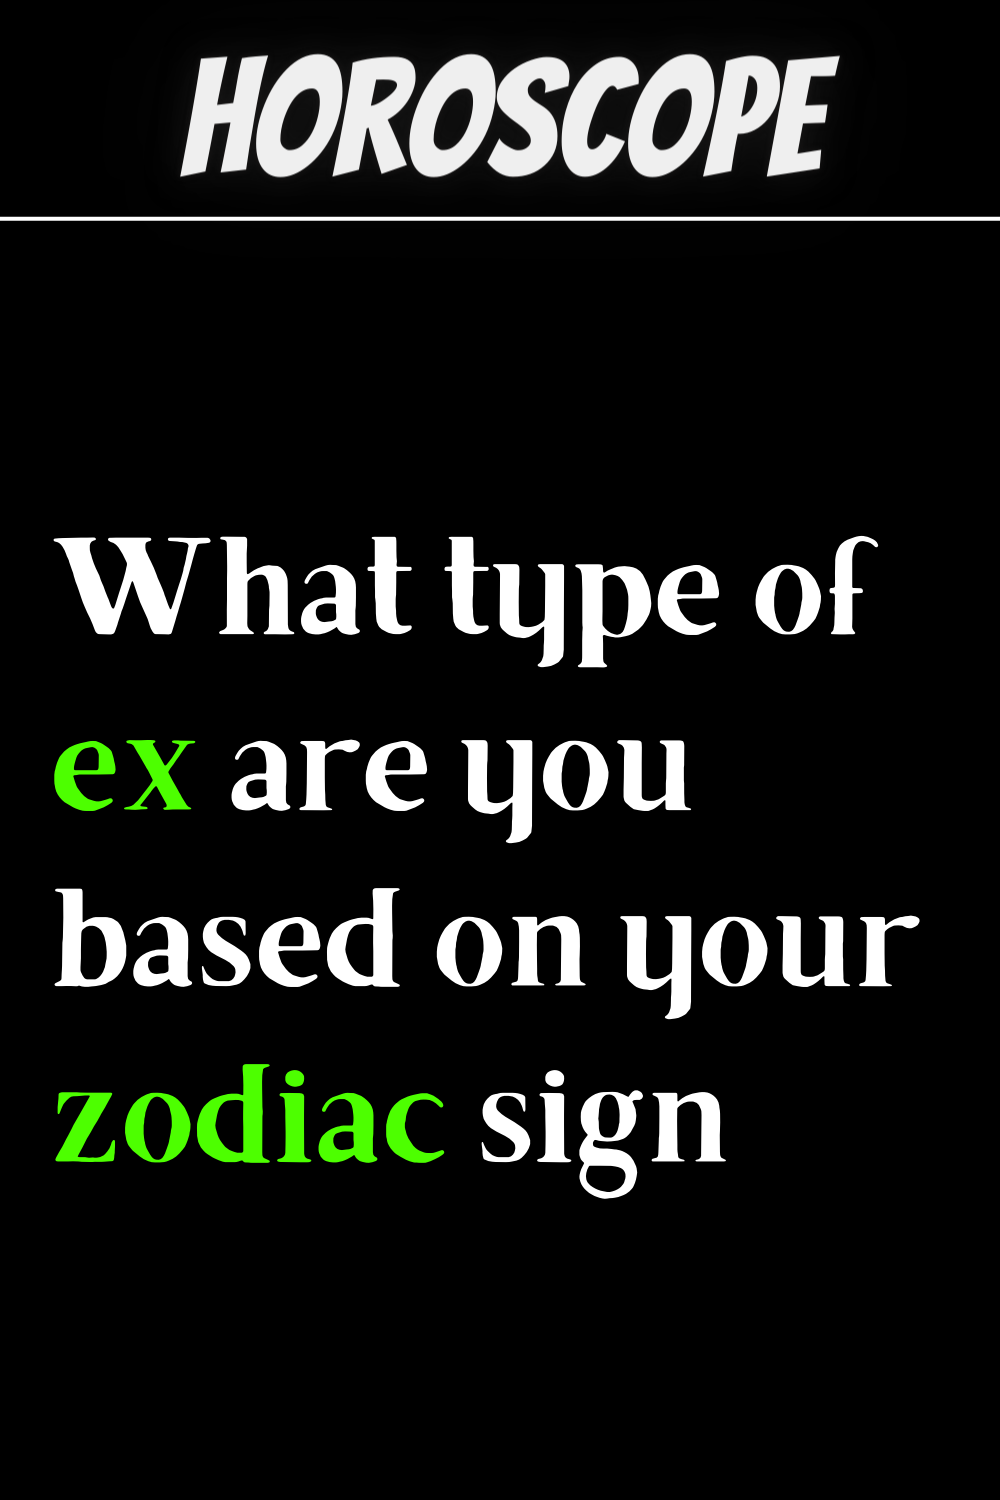 What type of ex are you based on your zodiac sign